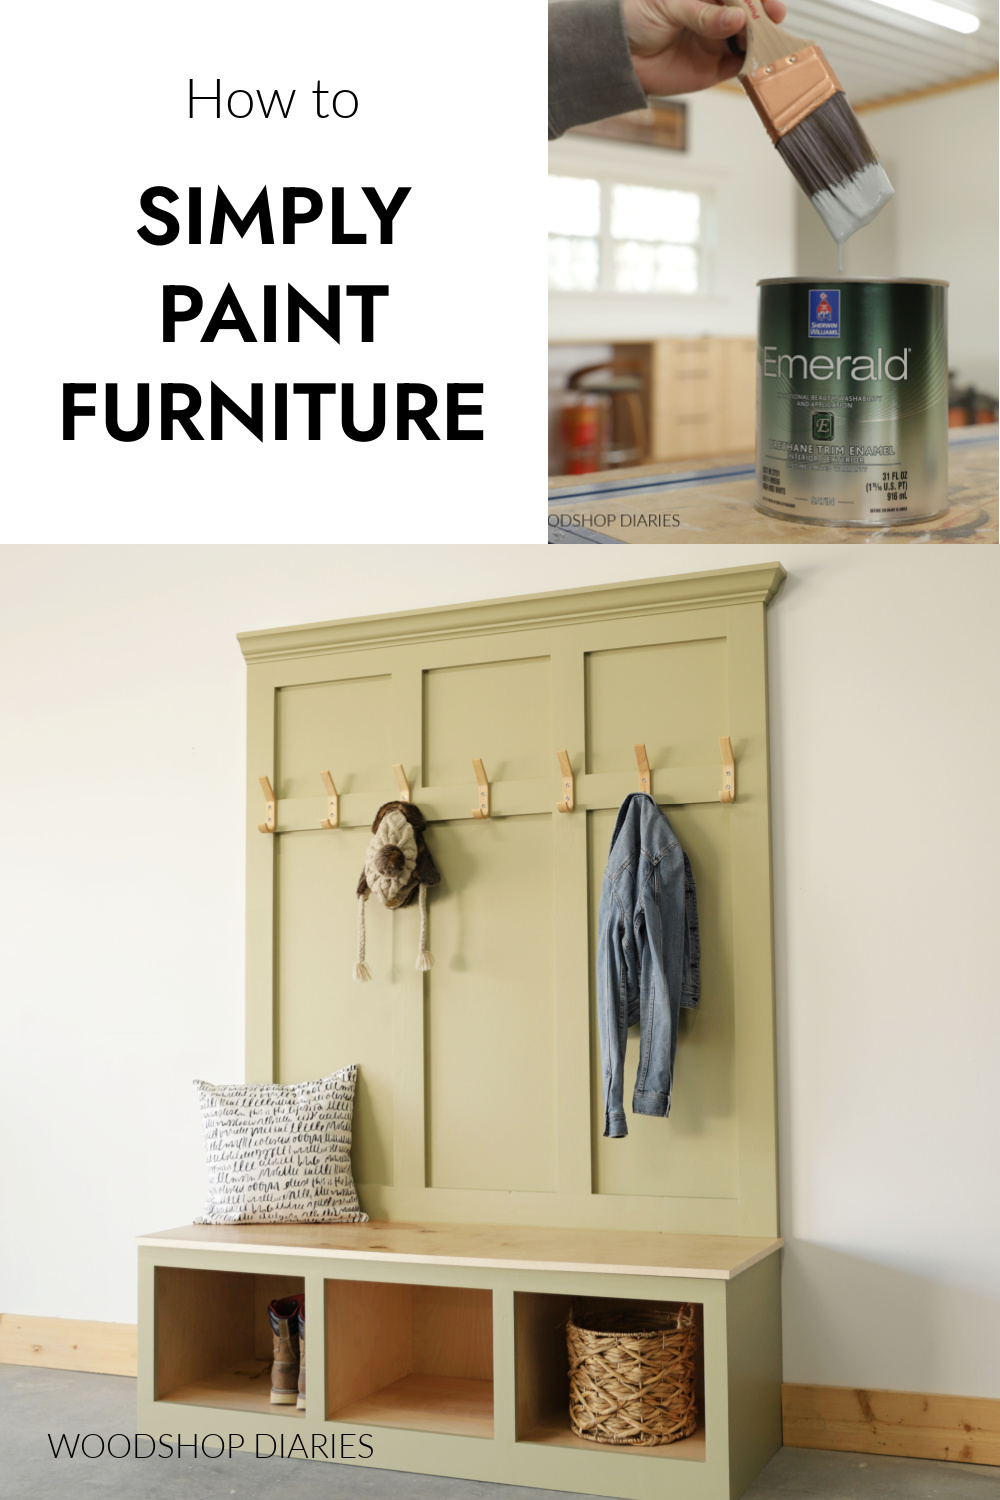 Pinterest collage image showing dripping paint brush at top right corner and painted hall tree project on bottom with text "how to simply paint furniture"